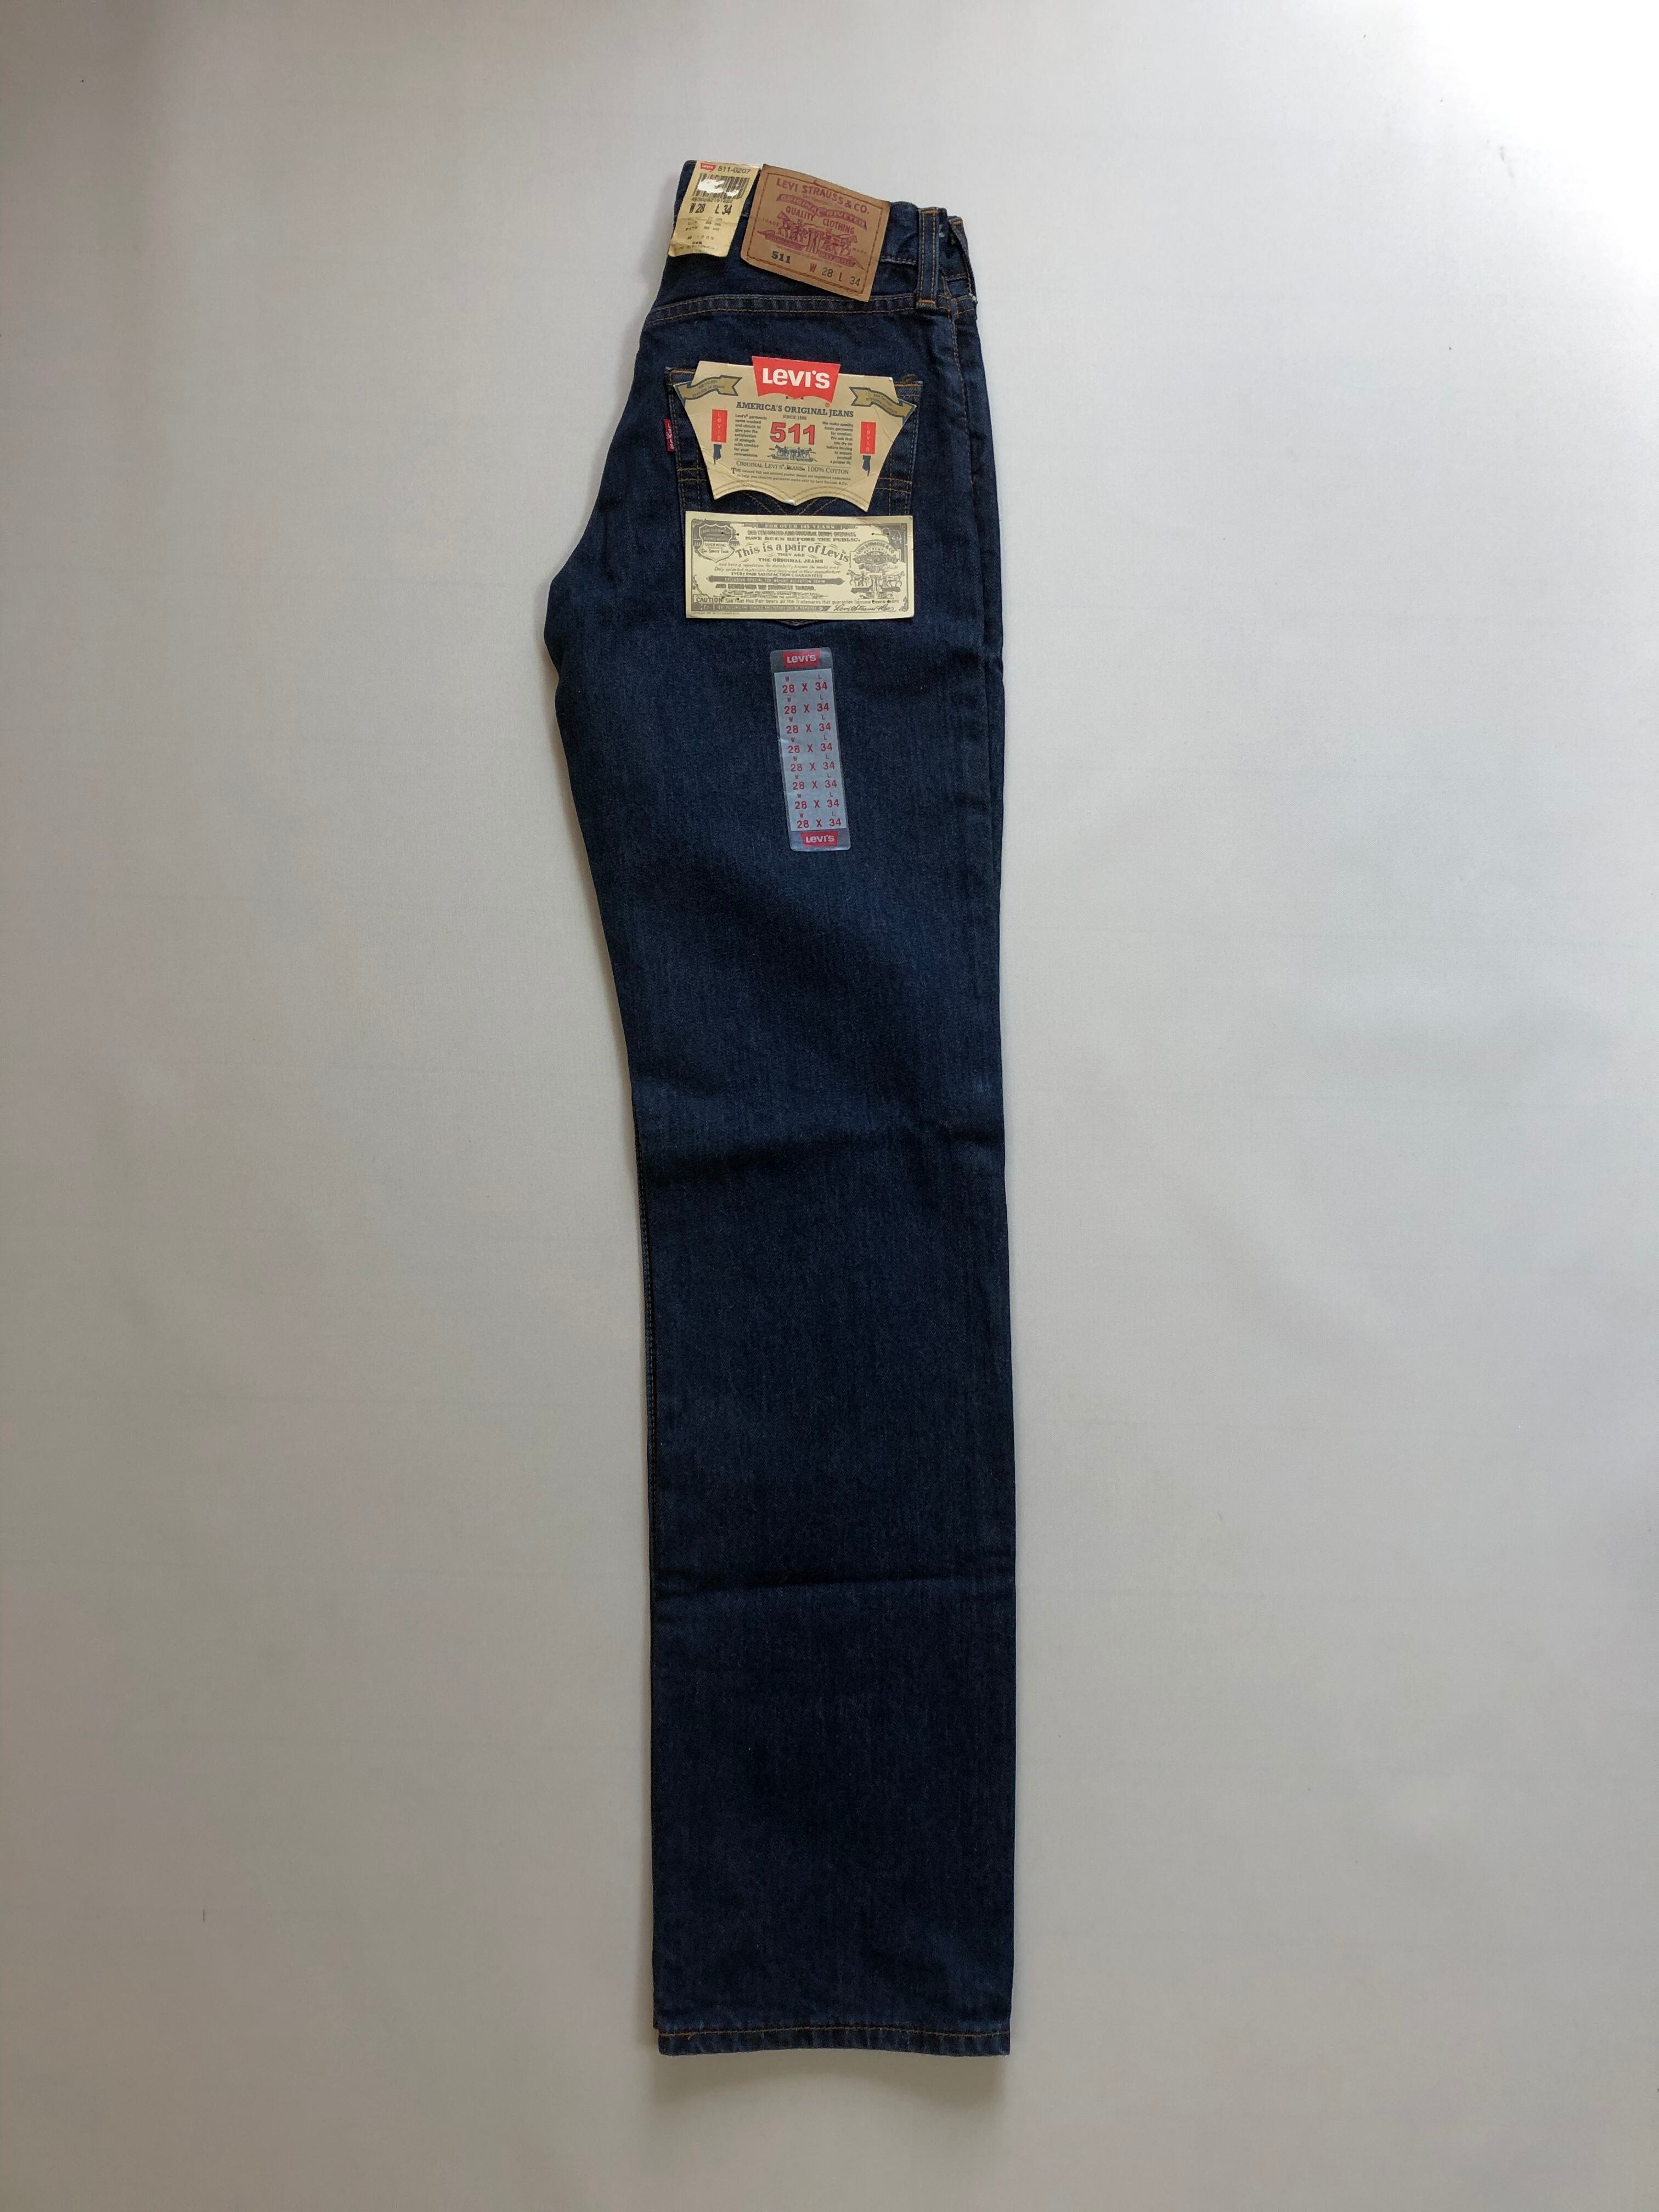 90's dead stock！LEVI'S リーバイス 511 322 | ＳＥＣＯＮＤ HAND RED